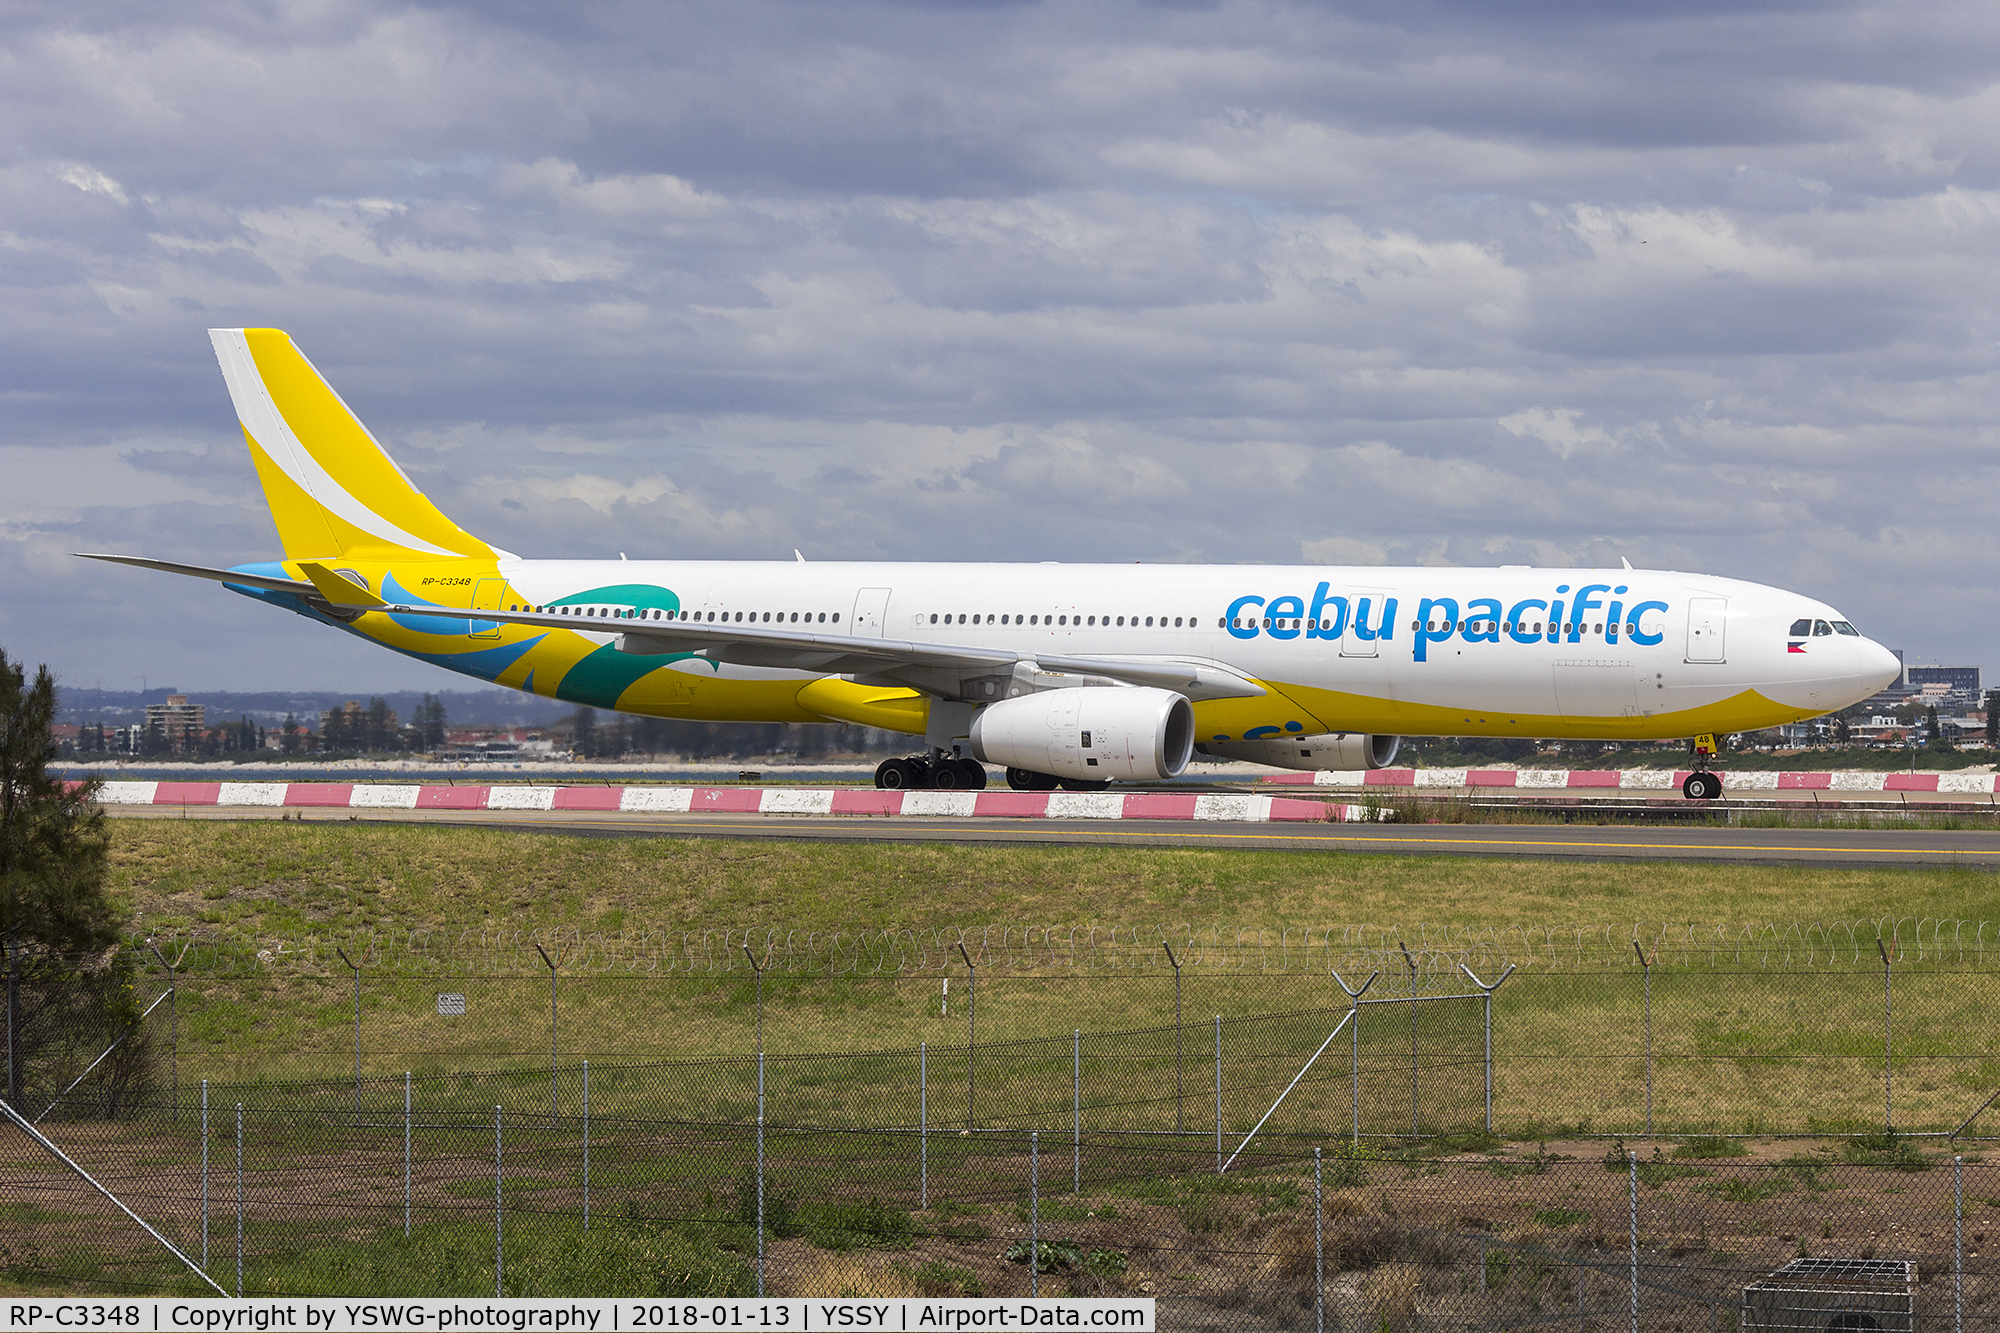 RP-C3348, 2017 Airbus A330-343 C/N 1789, Cebu Pacific (RP-C3348) Airbus A330-343 arriving at Sydney Airport